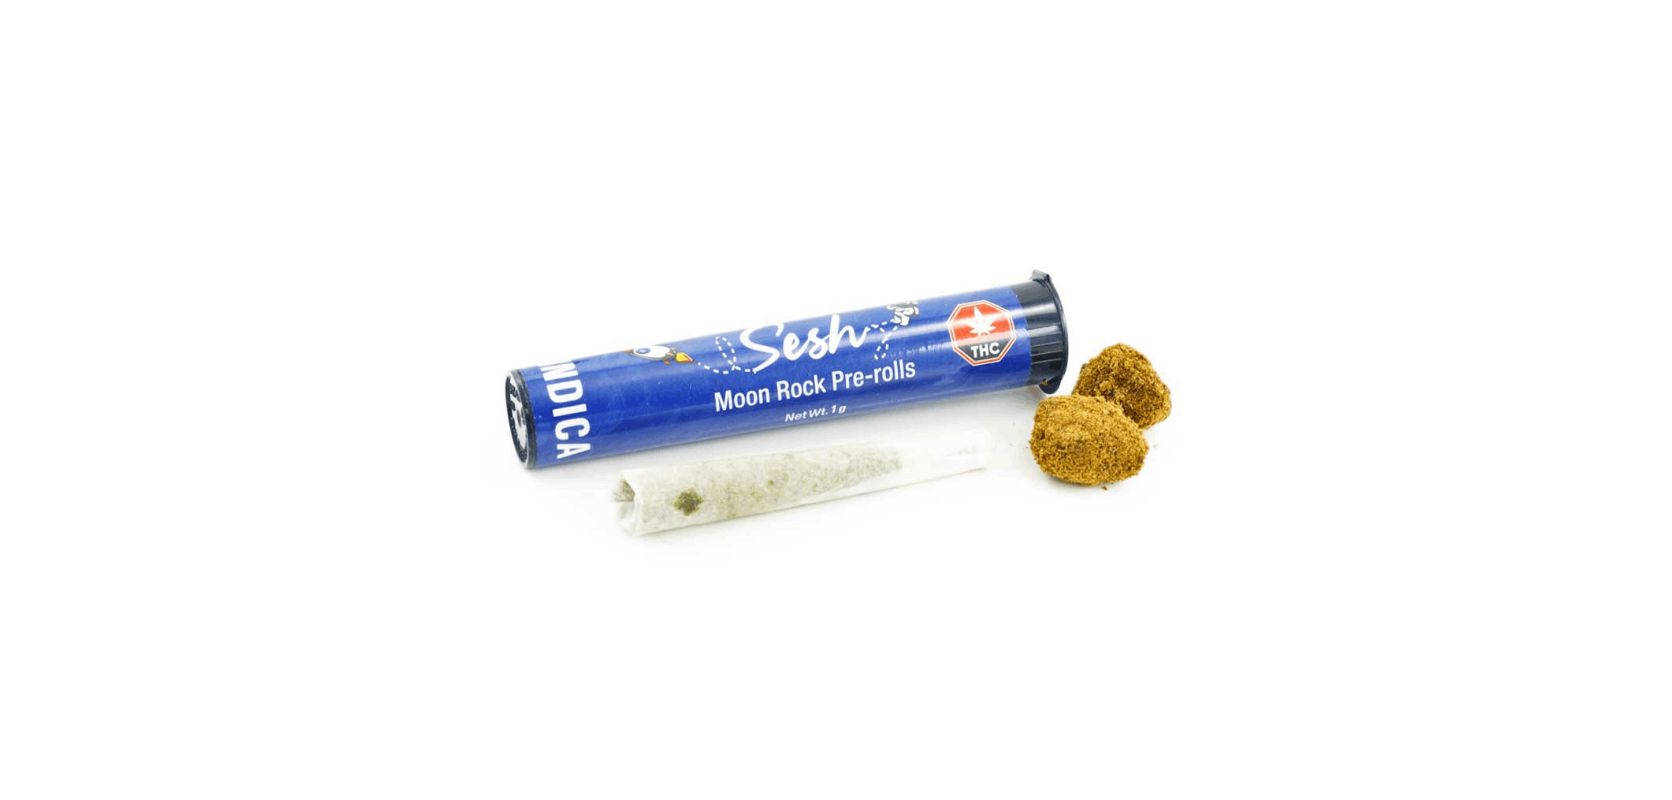 If you're looking for one of the most potent moon rocks THC products on the market, Sesh Moon Rock Joints (Indica/Sativa) are definitely worth considering. 